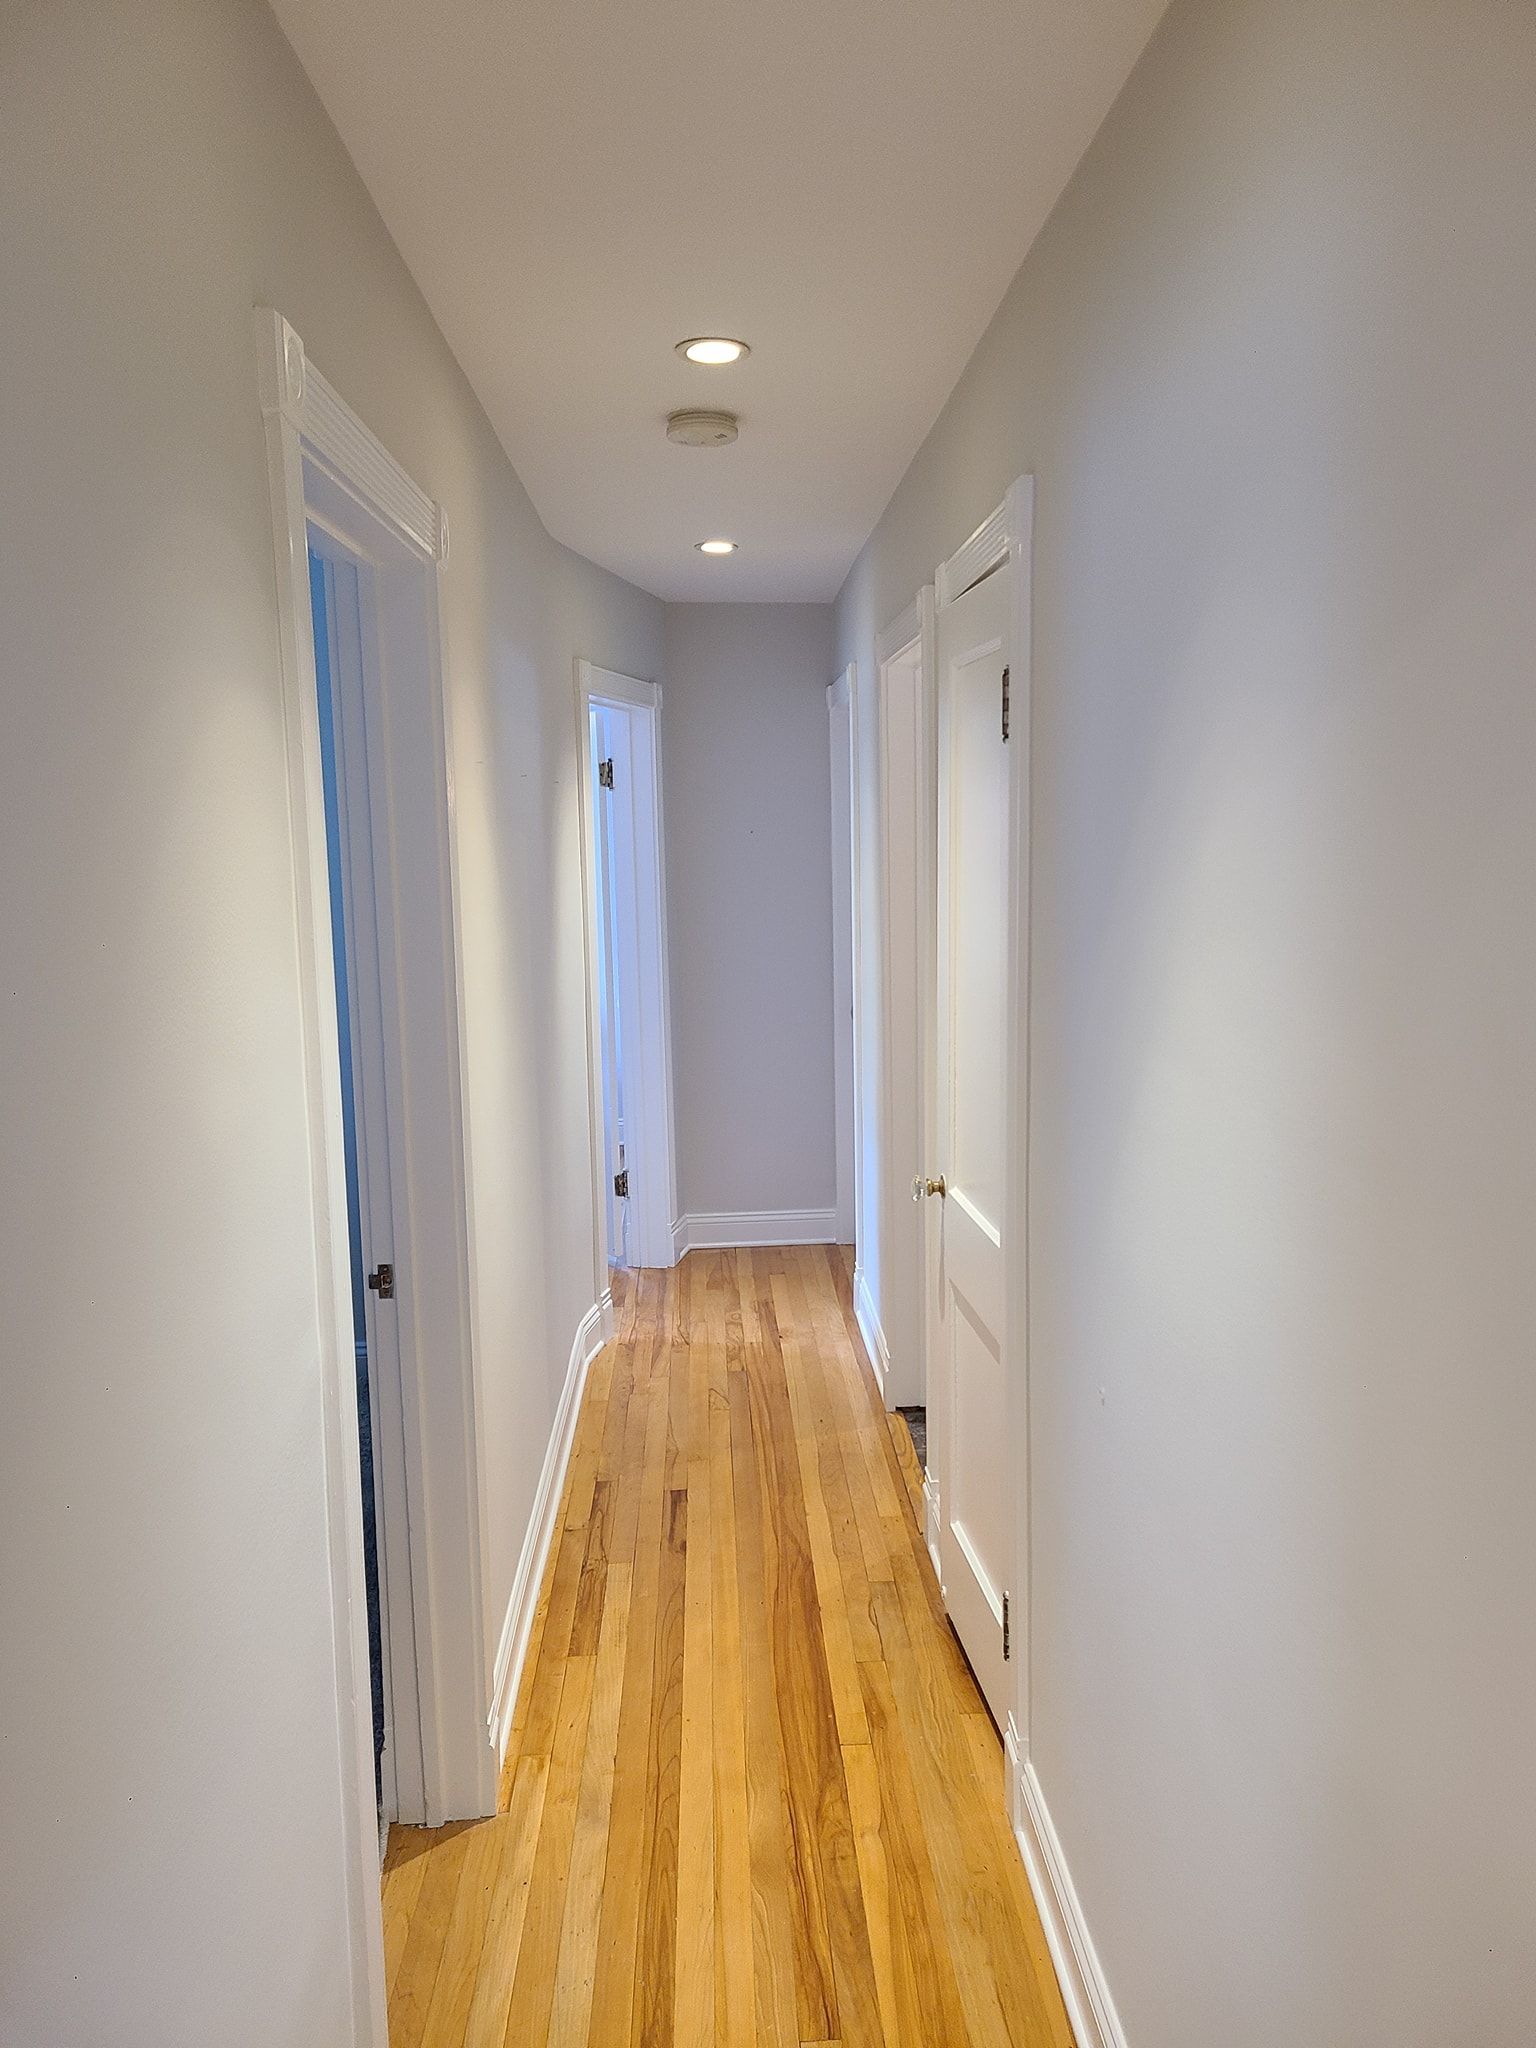 A long hallway with wooden floors and white walls